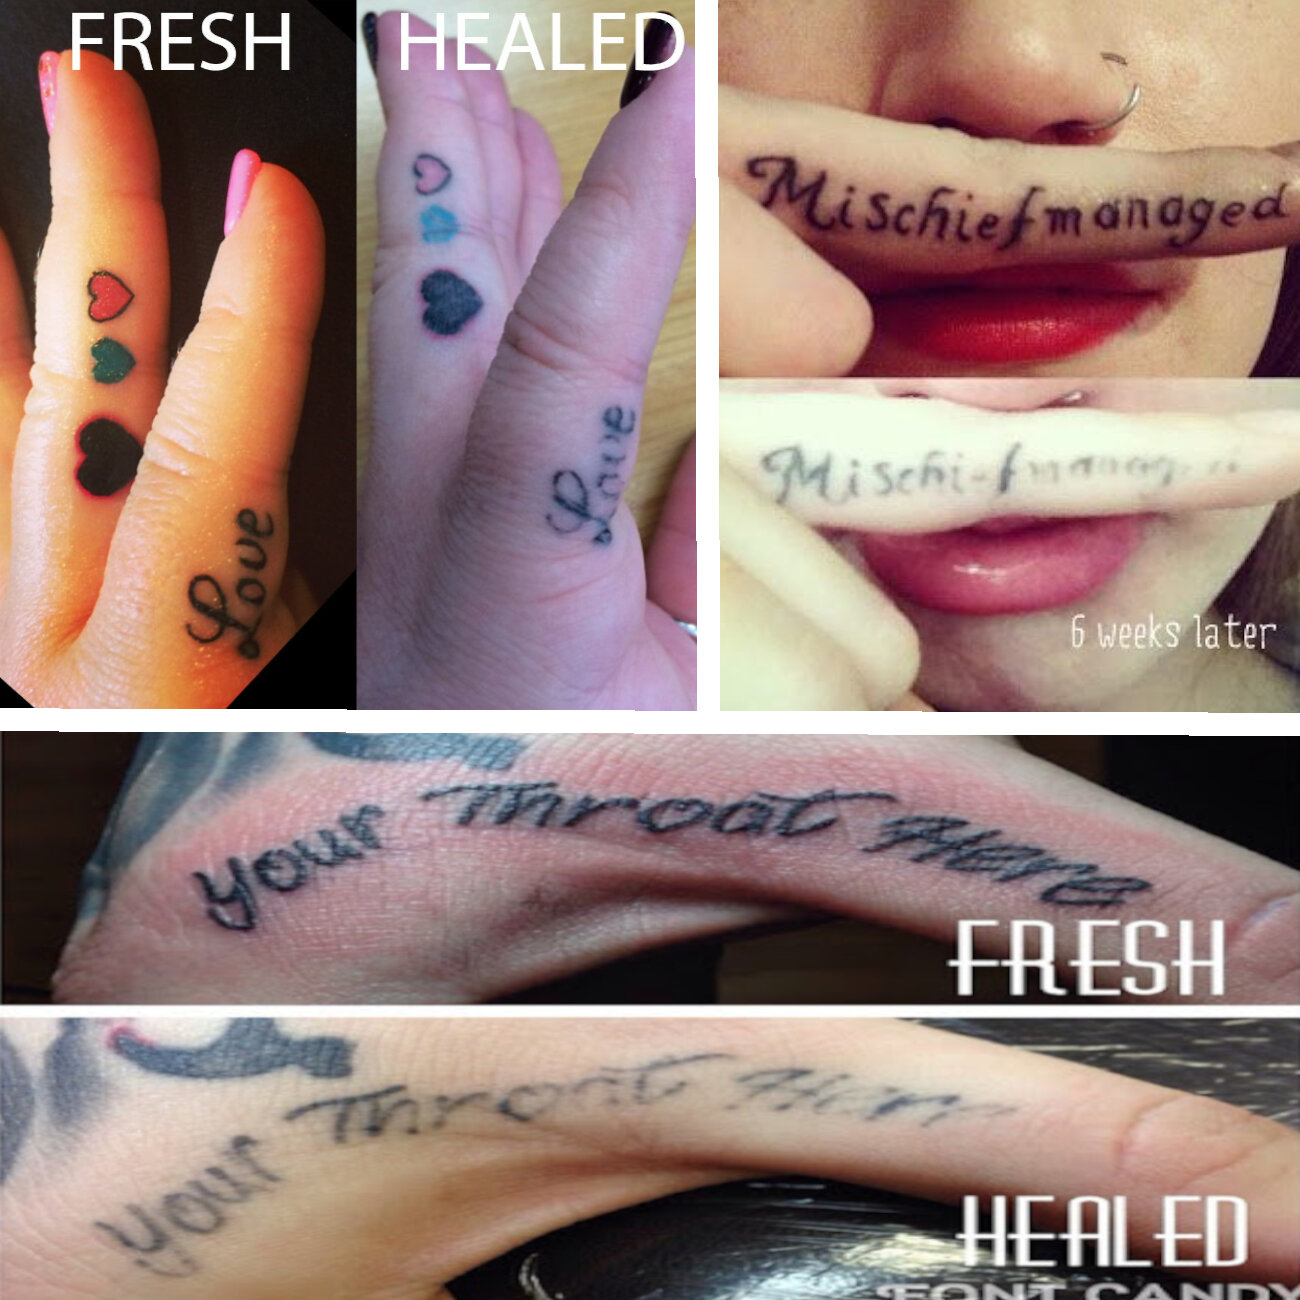 Face and Hand Tattoos: Why We Might Tell You 